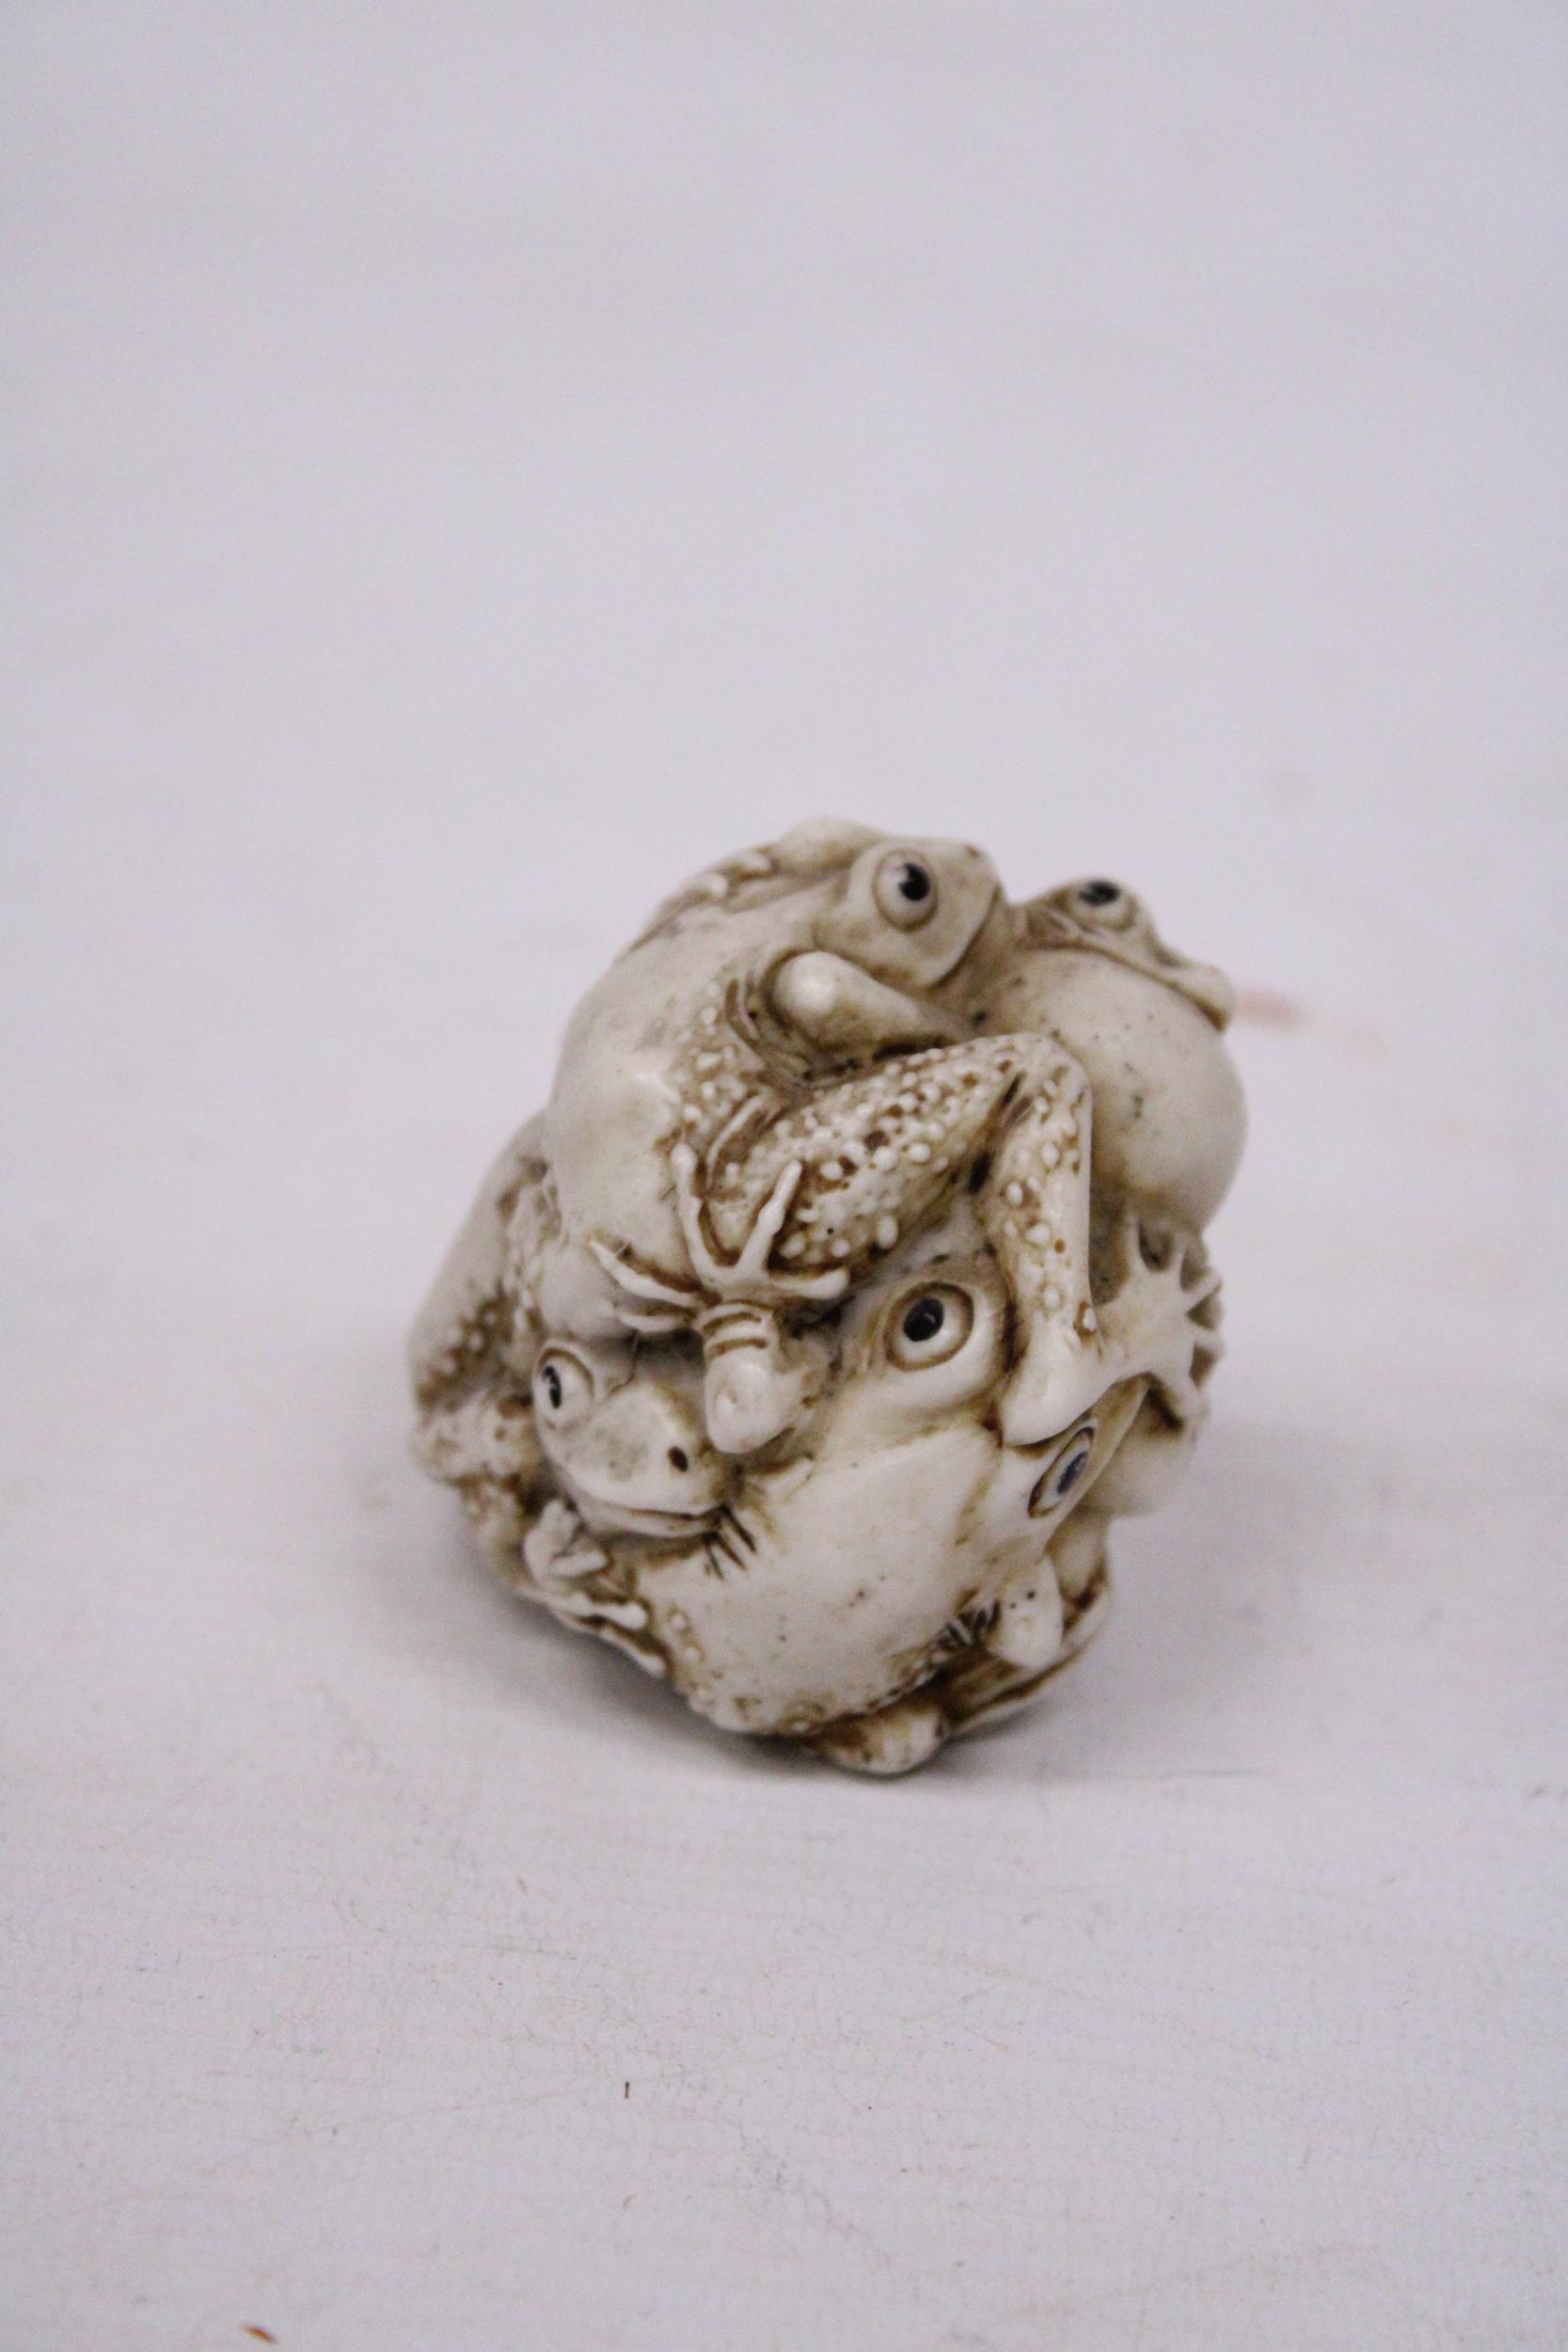 A HAND CARVED ORIENTAL FROG ORNAMENT - Image 2 of 6